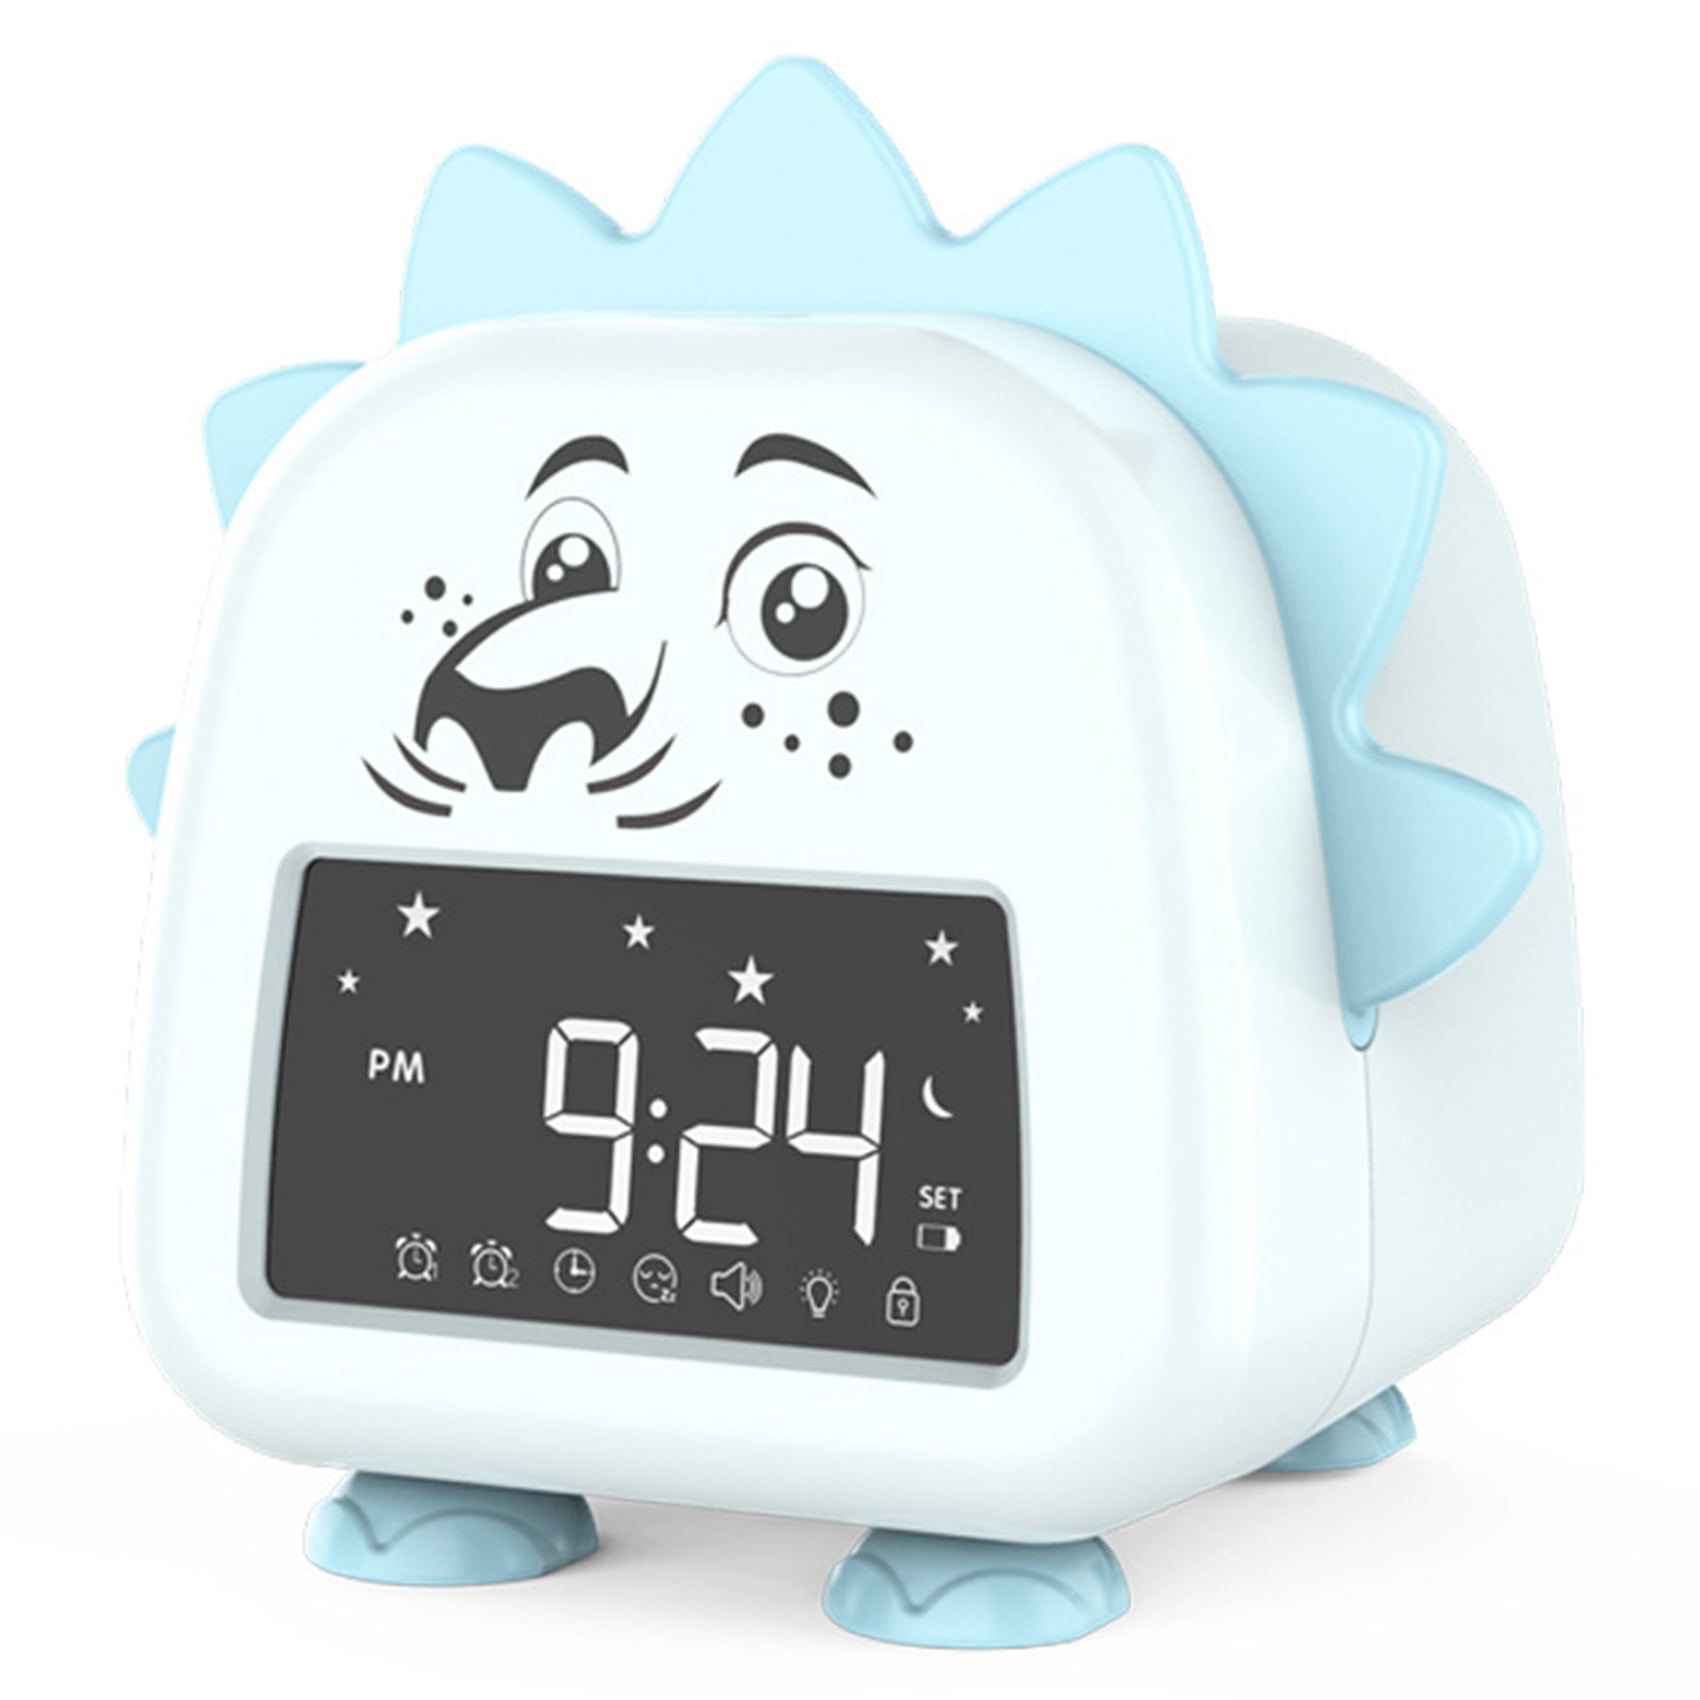 Exclusive iWake 2.5" LCD Digital Alarm Clock with Blue Back-light 